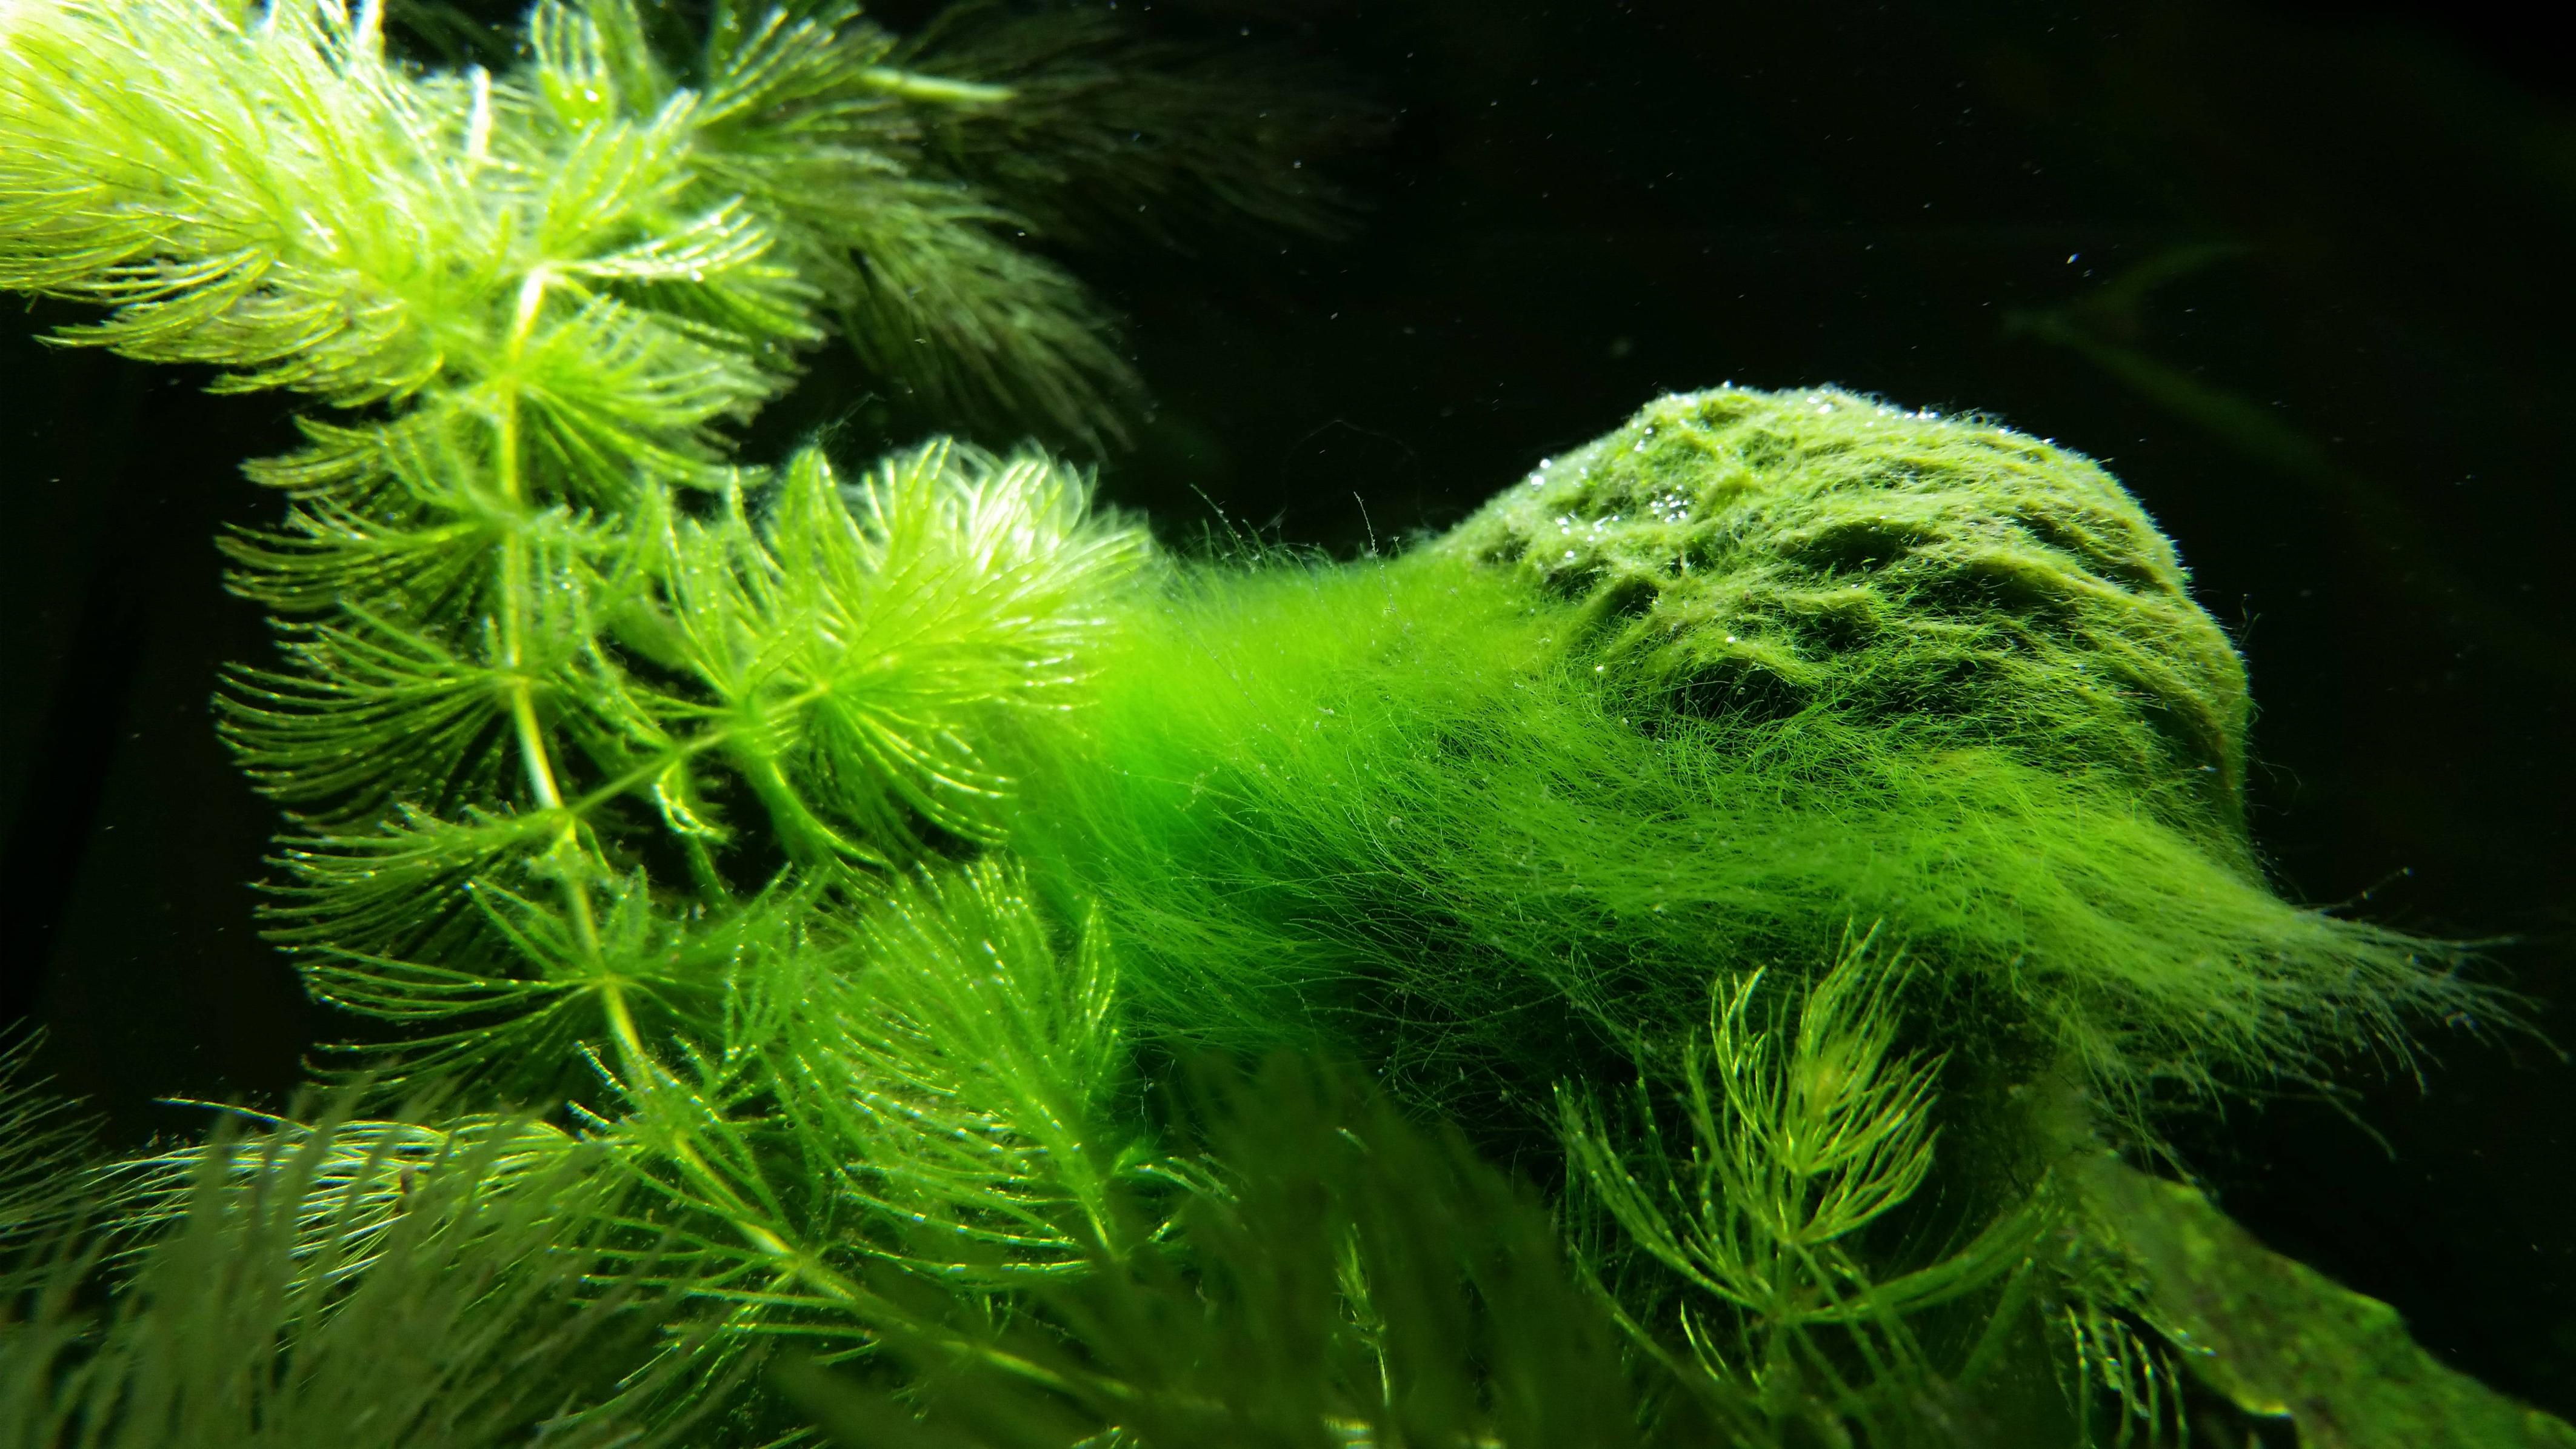 How to make your aquarium plants grow faster?